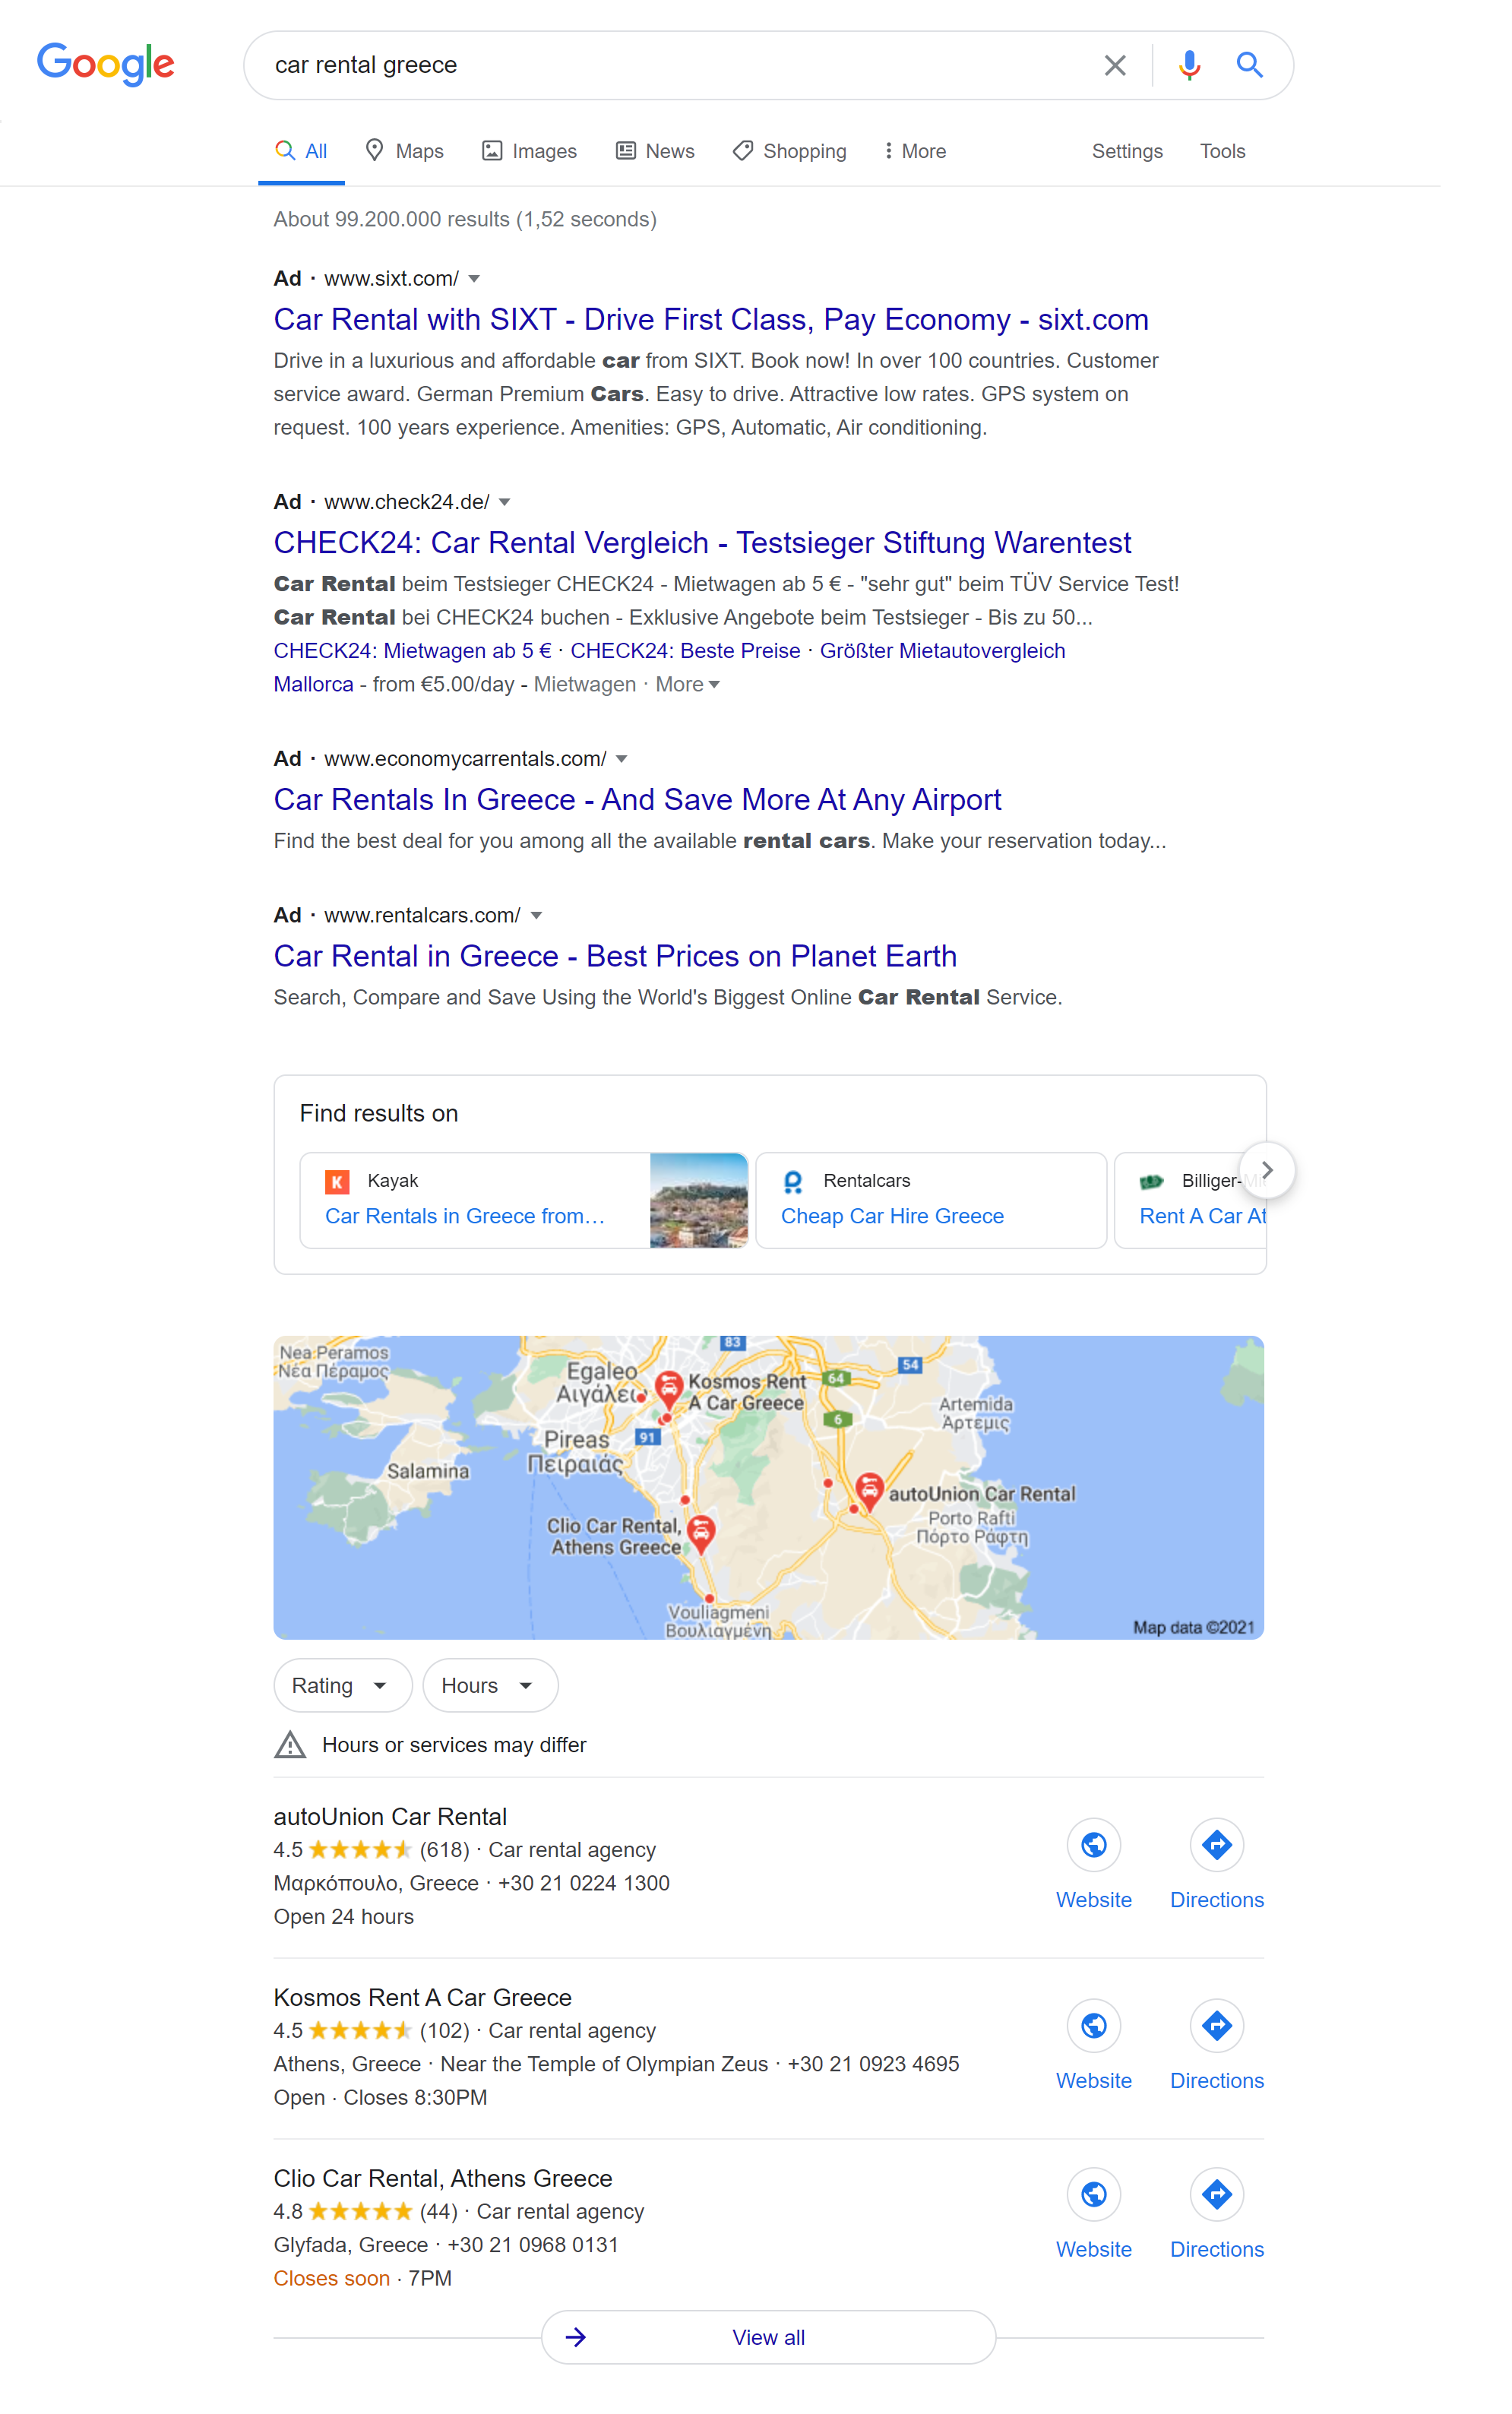 car rental matches in Google search results.